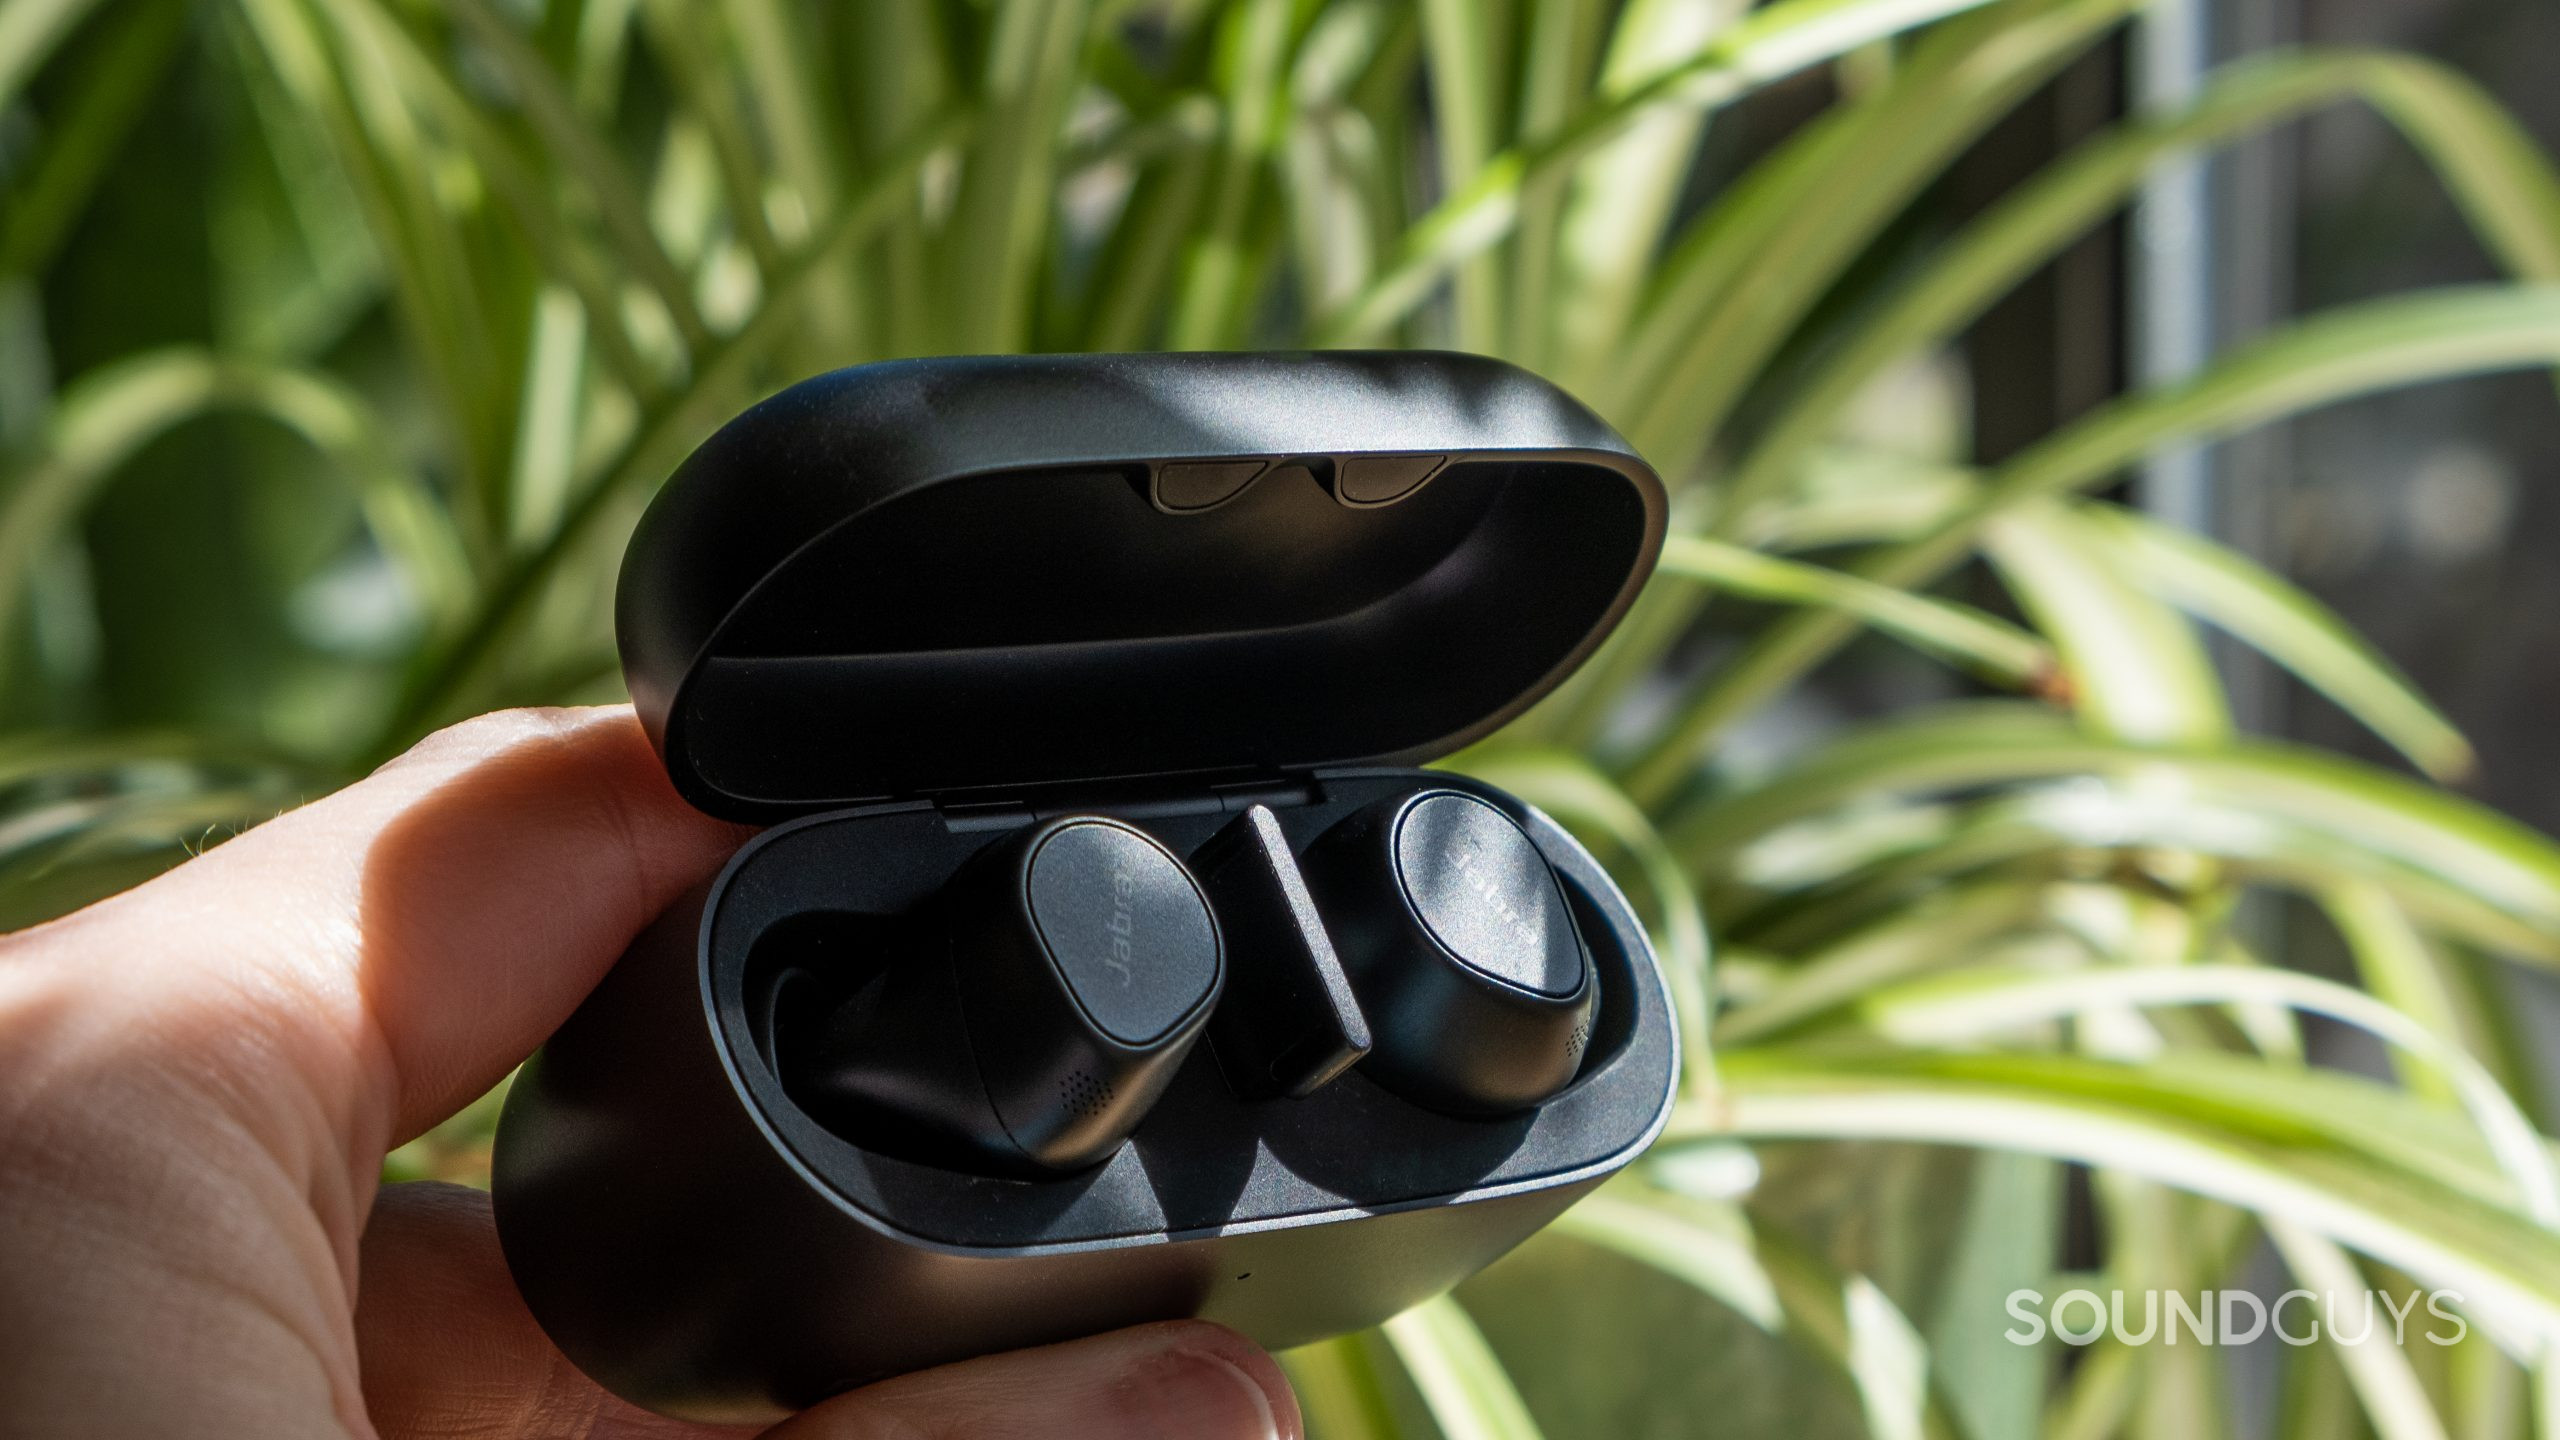 A hand holds the open case of the Jabra Evolve2 Buds in front of a fern.